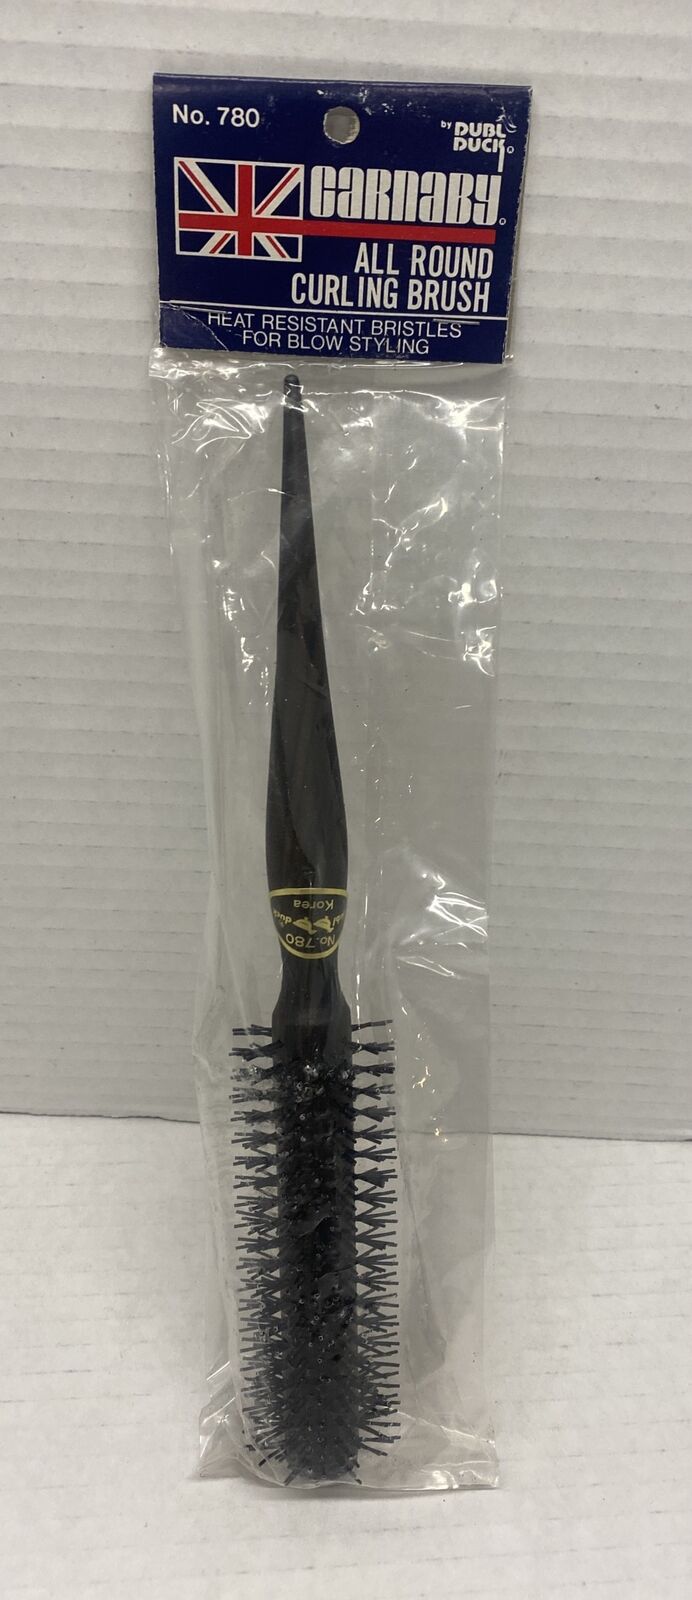 VTG NOS Dubl Duck 780 All Round Curling Hair Brush Heat Resistant for Blow outs